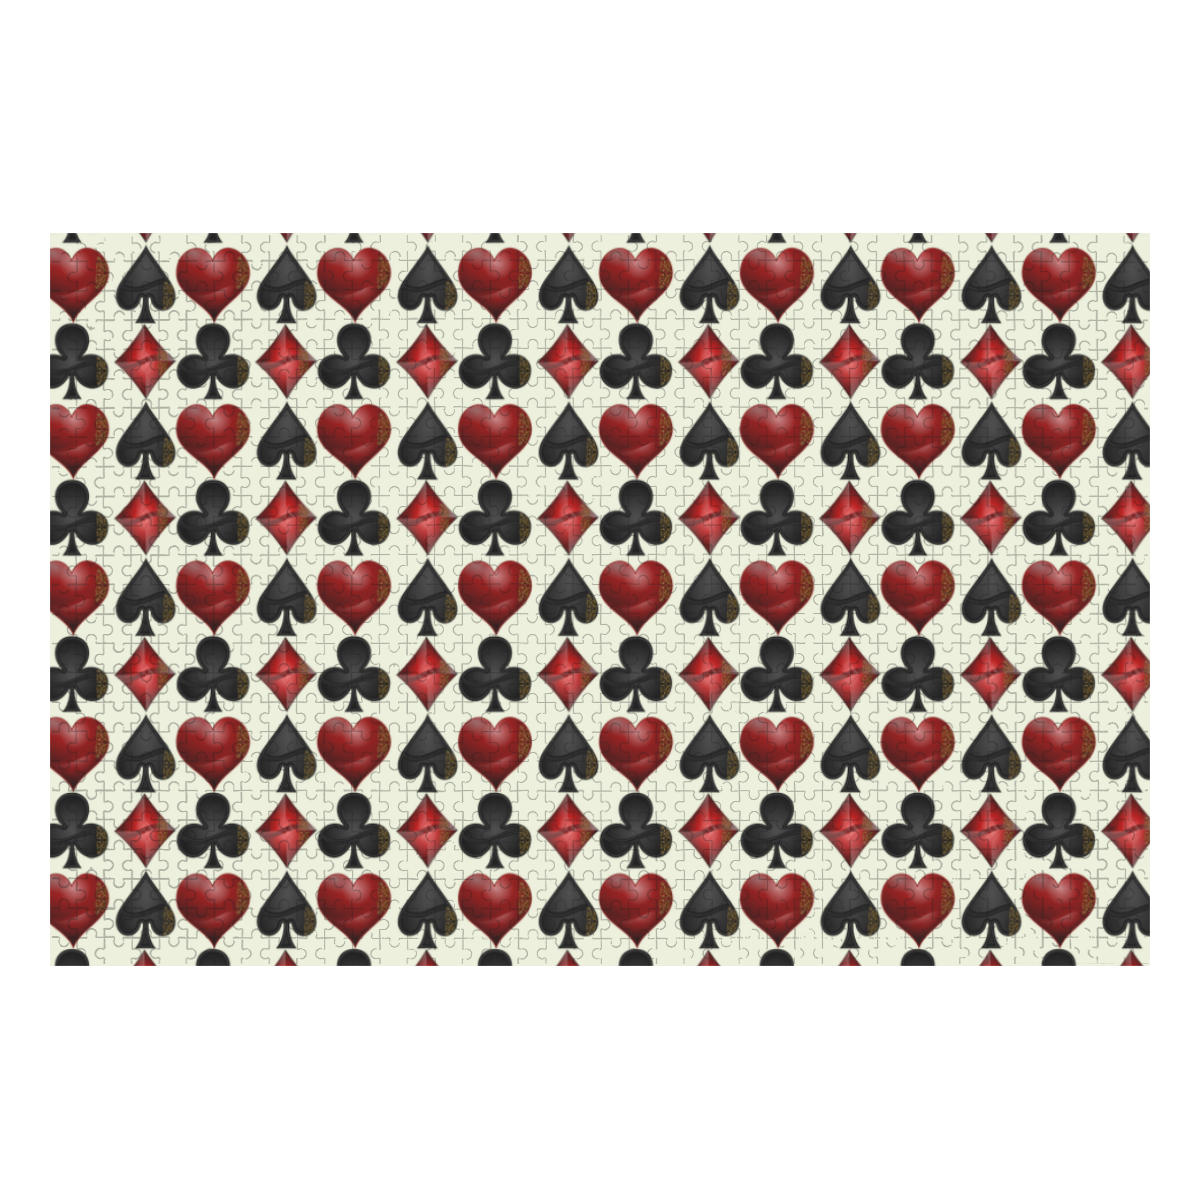 Las Vegas Black and Red Casino Poker Card Shapes 1000-Piece Wooden Photo Puzzles